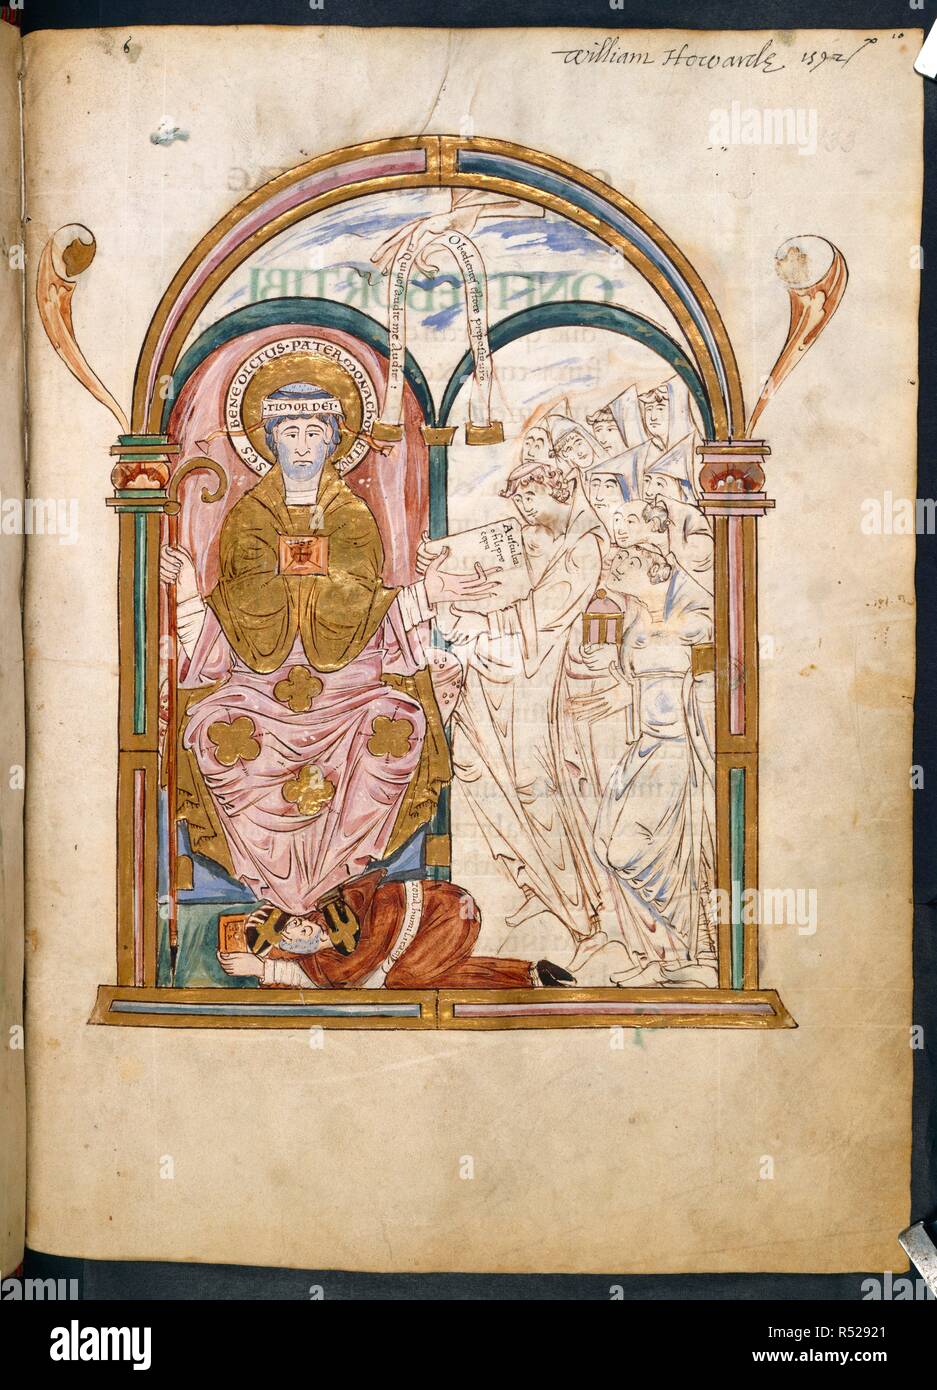 St. Benedict giving the Rule to the monks. Framed by an arch, St. Benedict is seated, while monks approach with an open book. The scribe, Eadui Basan, kneels embracing the saint's feet. Above, the Hand of God appears holding an inscribed scroll,. Eadui Psalter. England [Canterbury]; 1012-1023. Source: Arundel 155, f.133. Language: Latin. Stock Photo